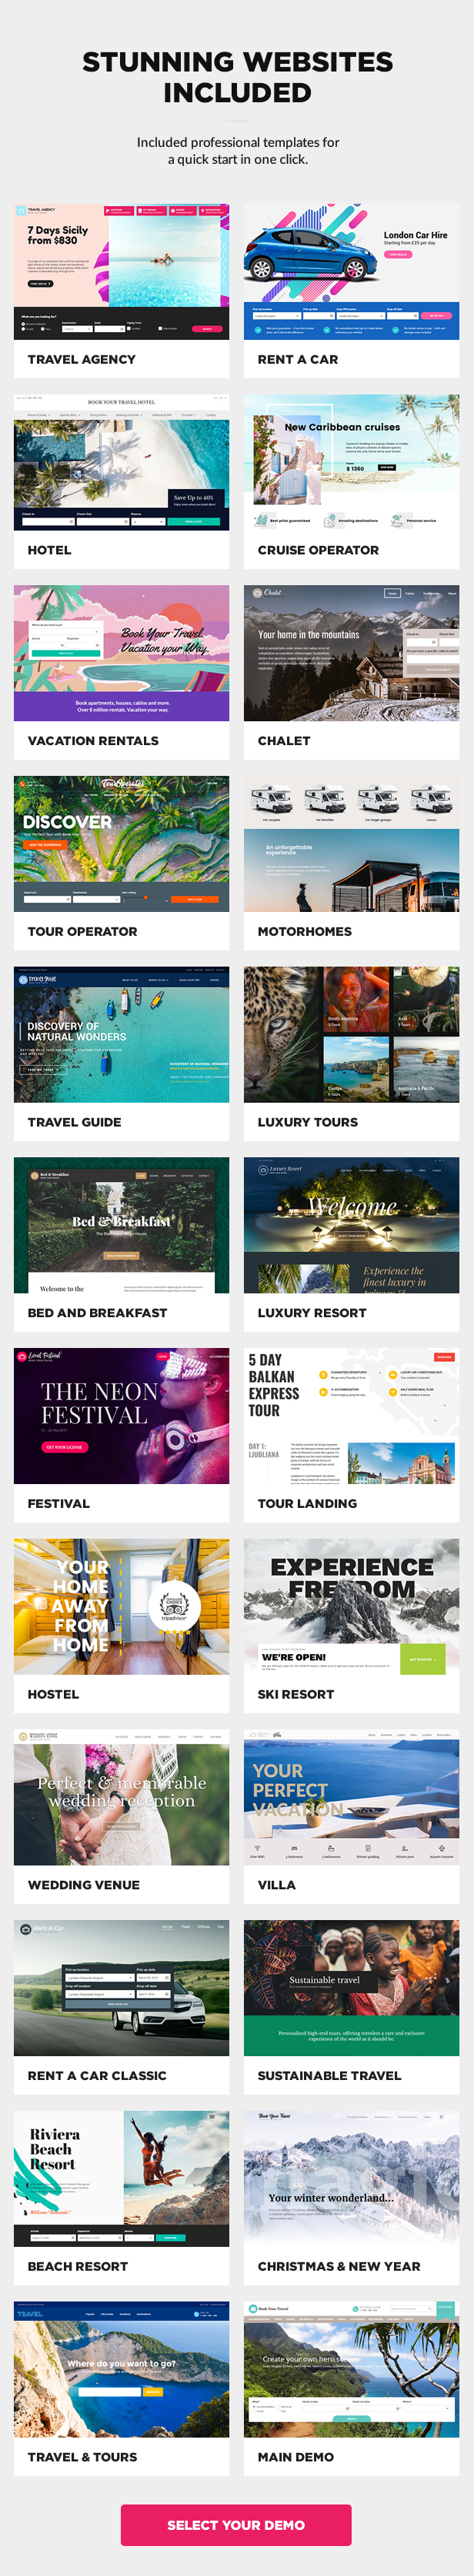 Book Your Travel - Online Booking WordPress Theme 8